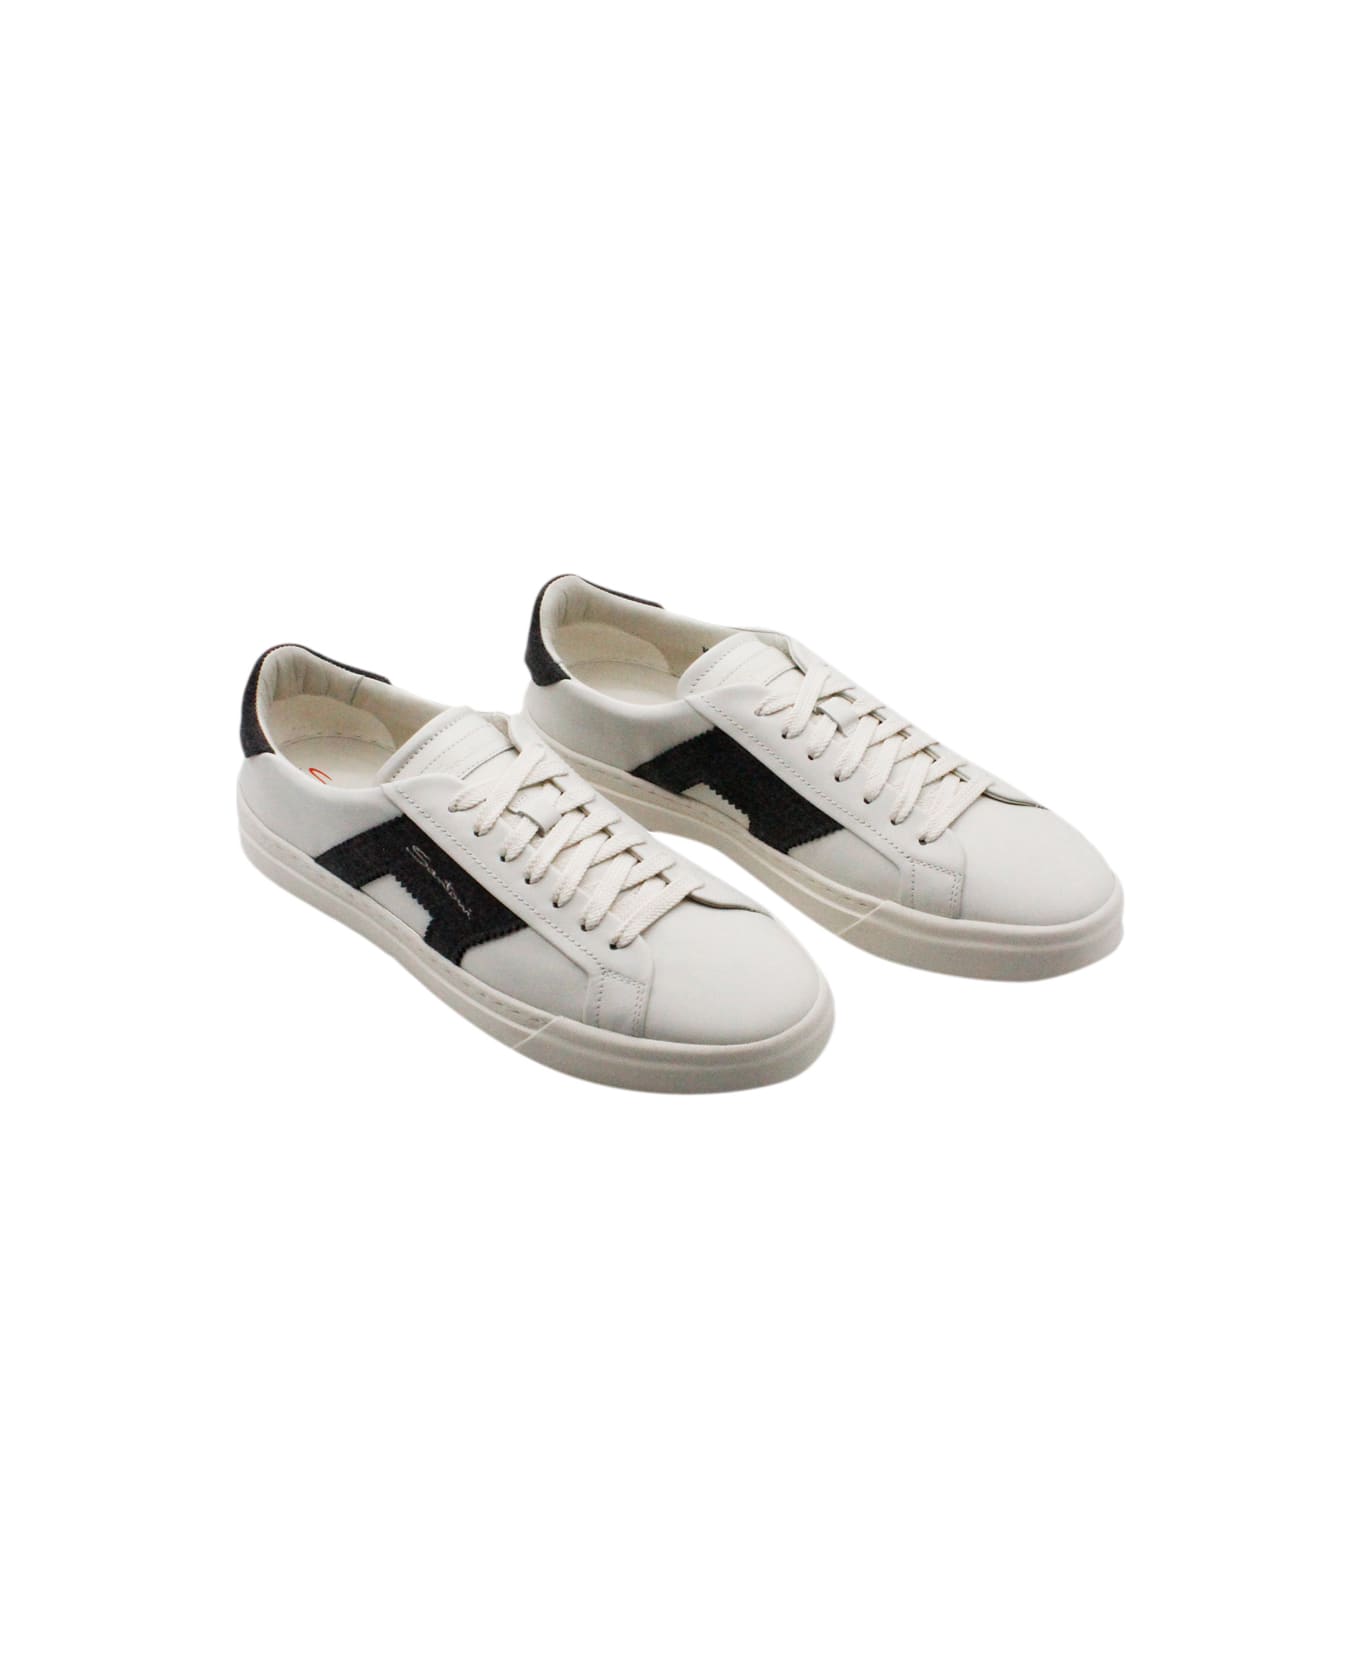 Santoni Sneaker In Soft Calfskin With Side And Back Inserts In Contrasting Color With Logo Lettering. Closing Laces - White